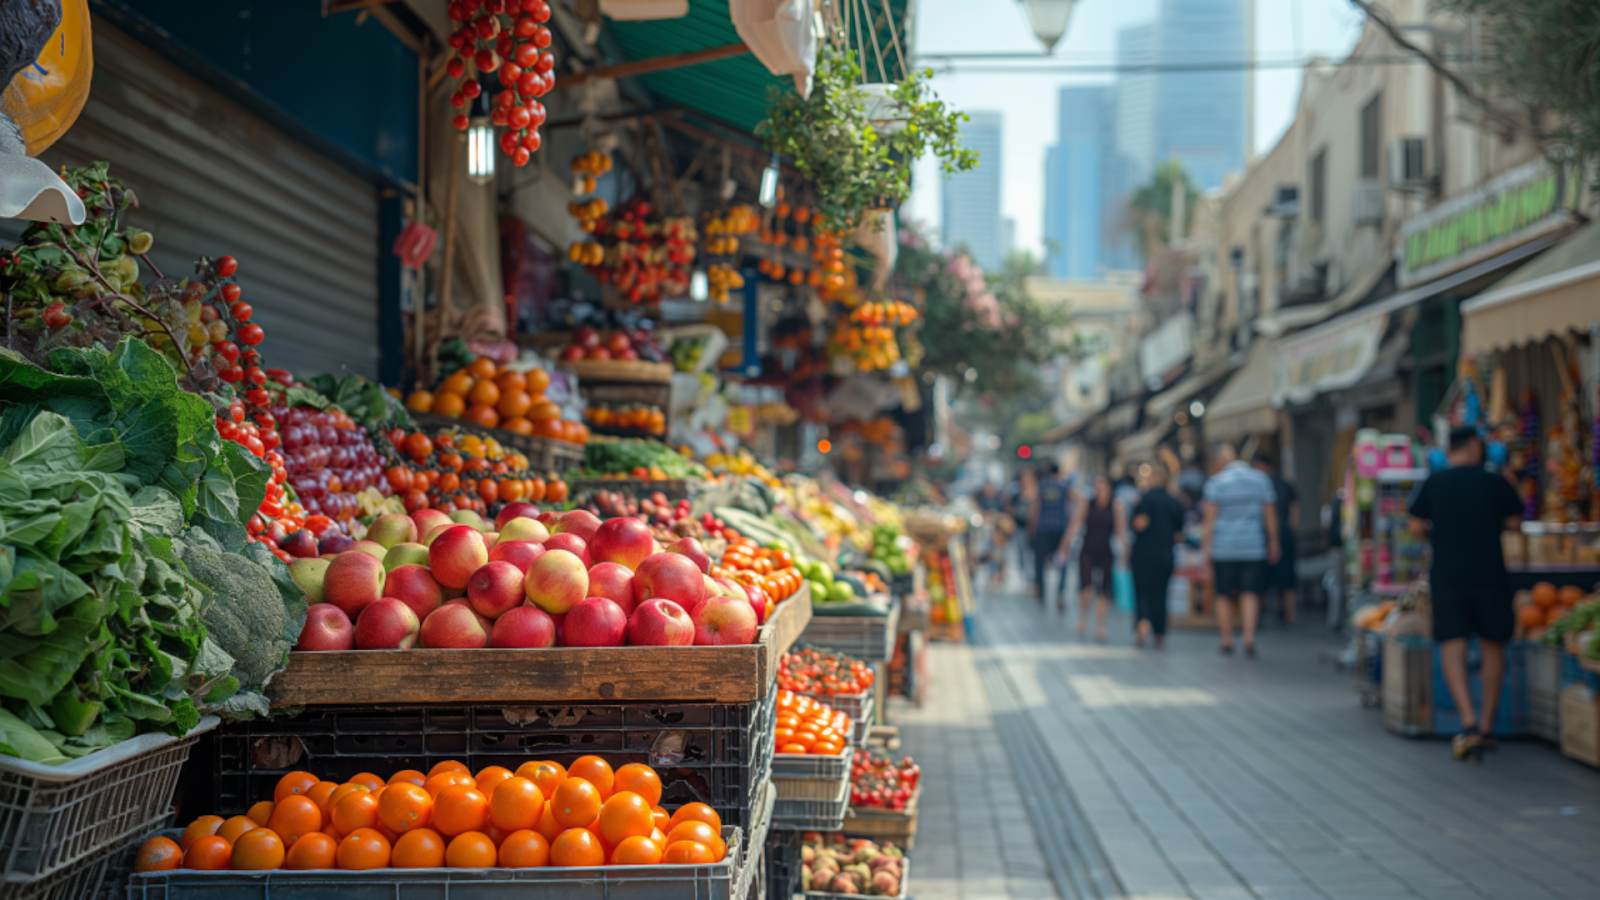 Vibrant marketplace in Tel Aviv filled with colorful stalls and diverse shoppers.